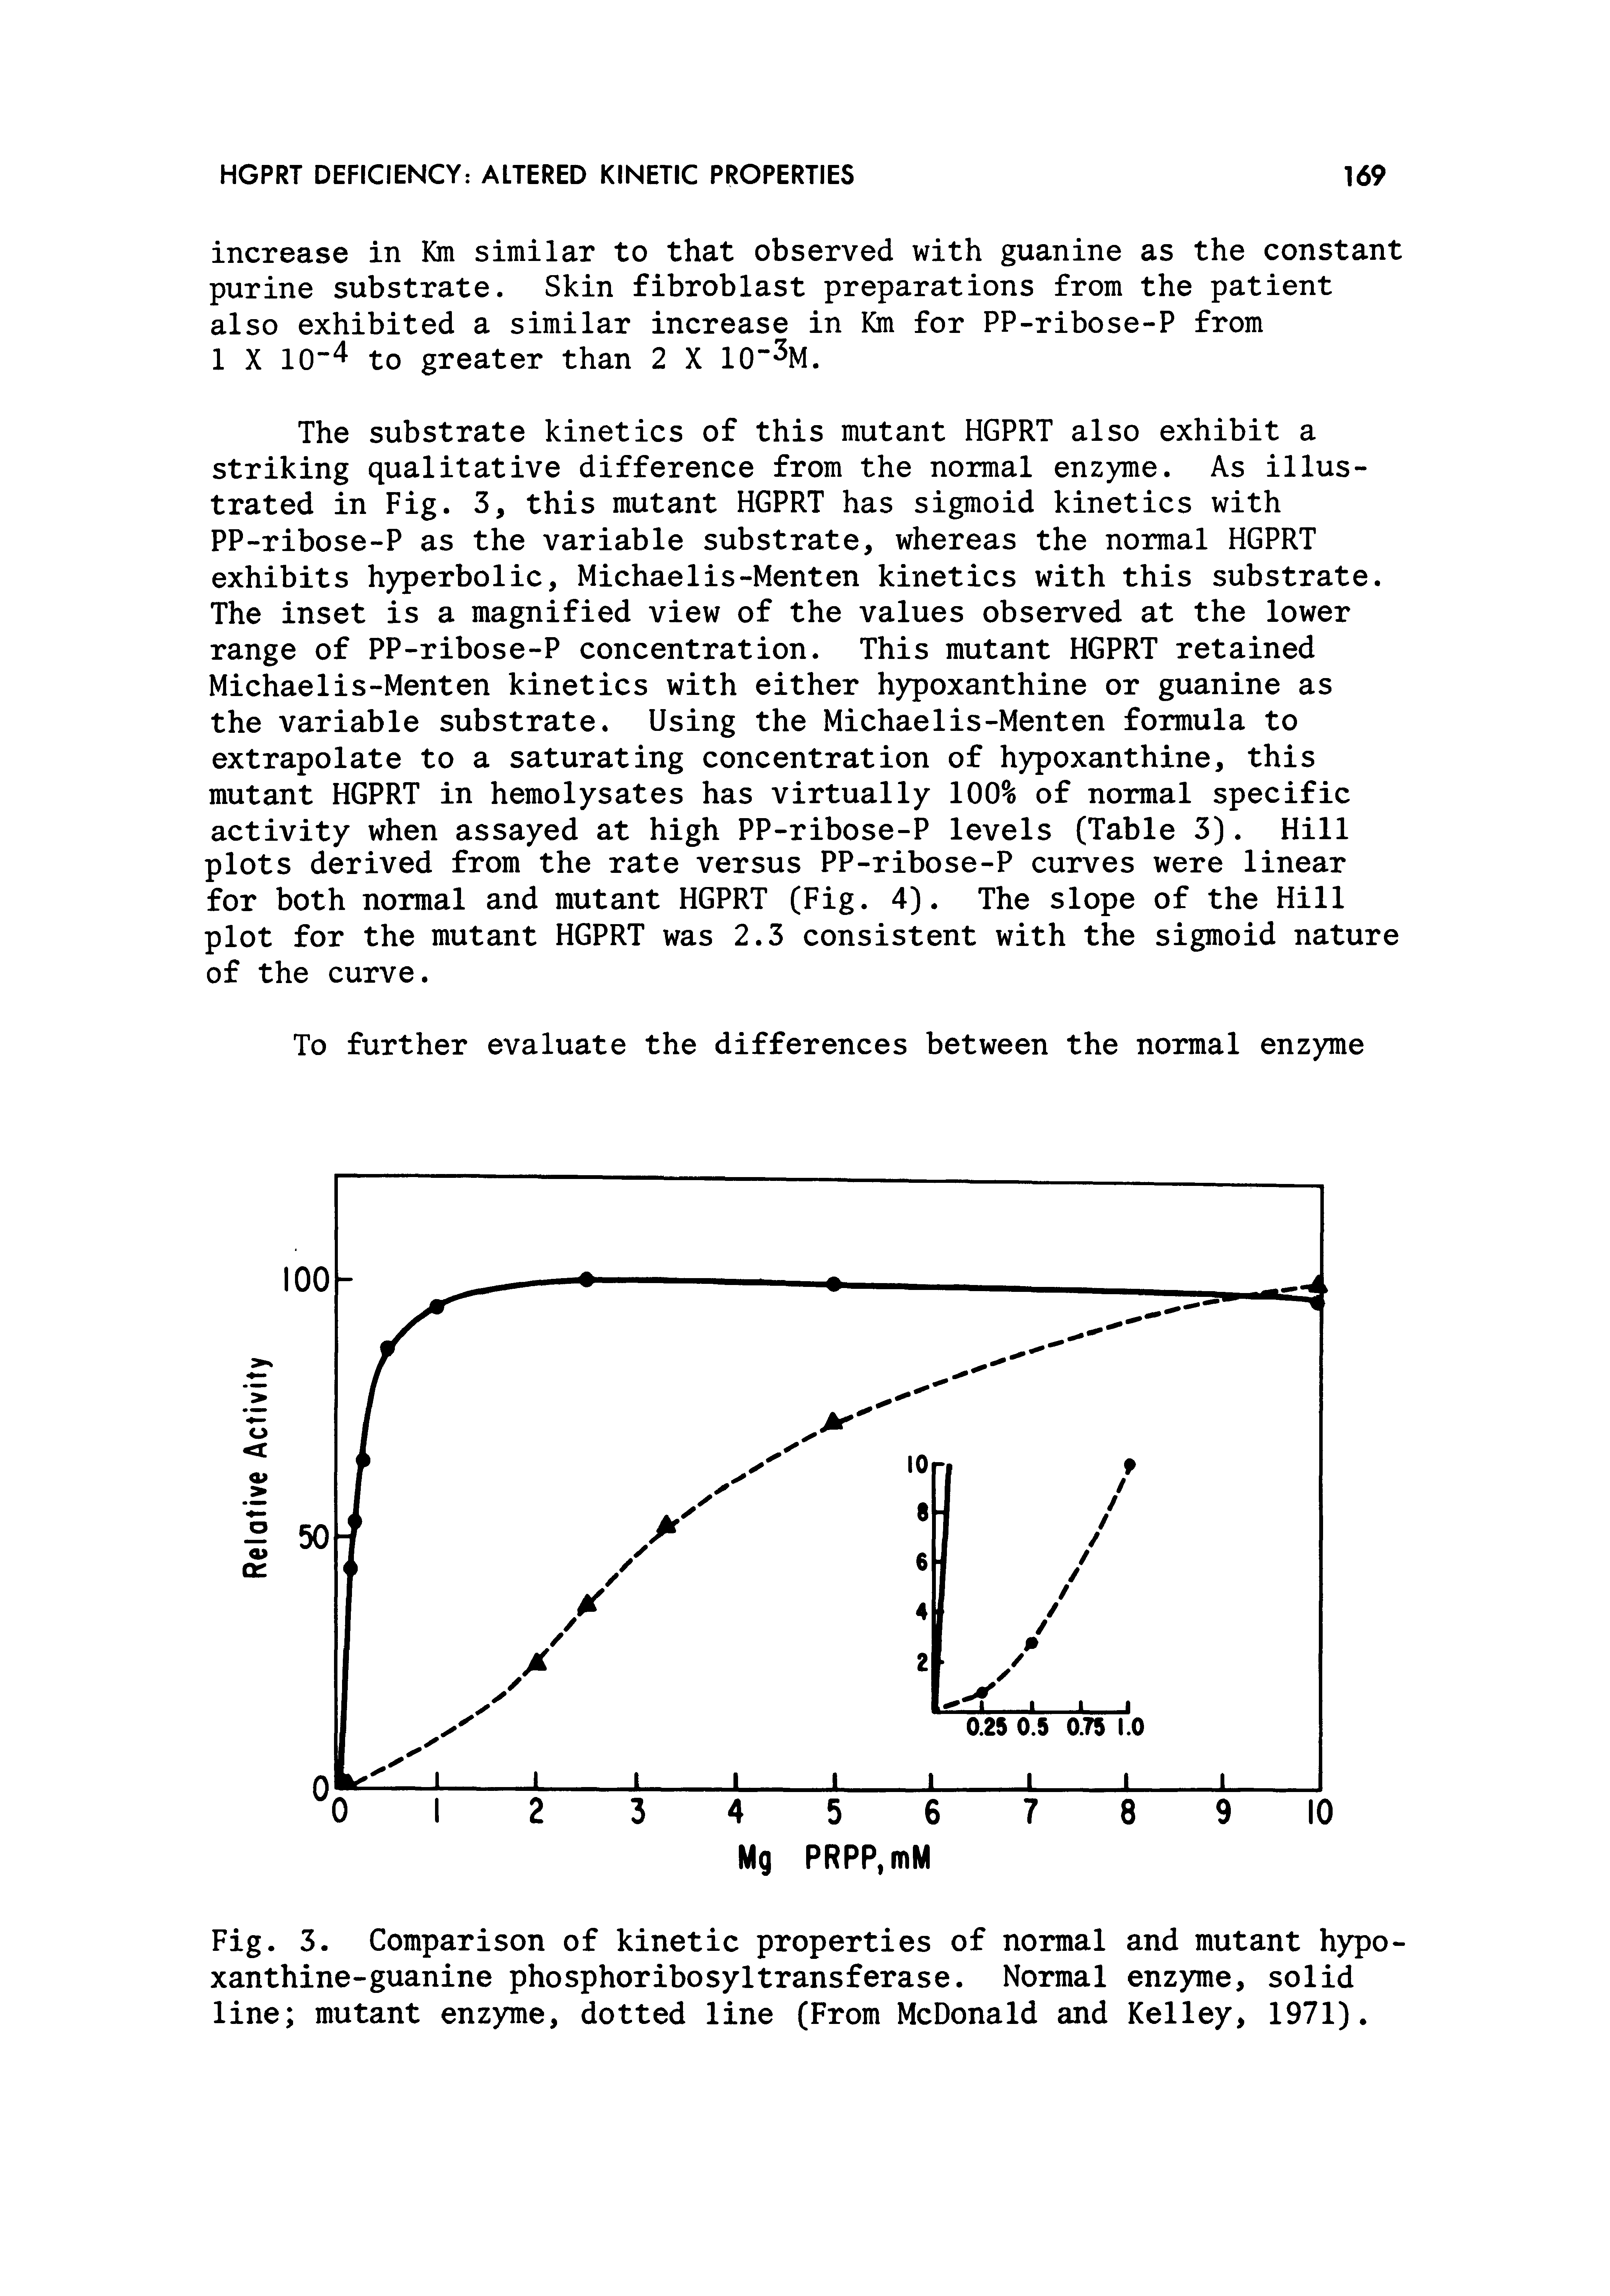 Fig. 3. Comparison of kinetic properties of normal and mutant hypo-xanthine-guanine phosphoribosyltransferase. Normal enzyme, solid line mutant enzyme, dotted line (From McDonald and Kelley, 1971).